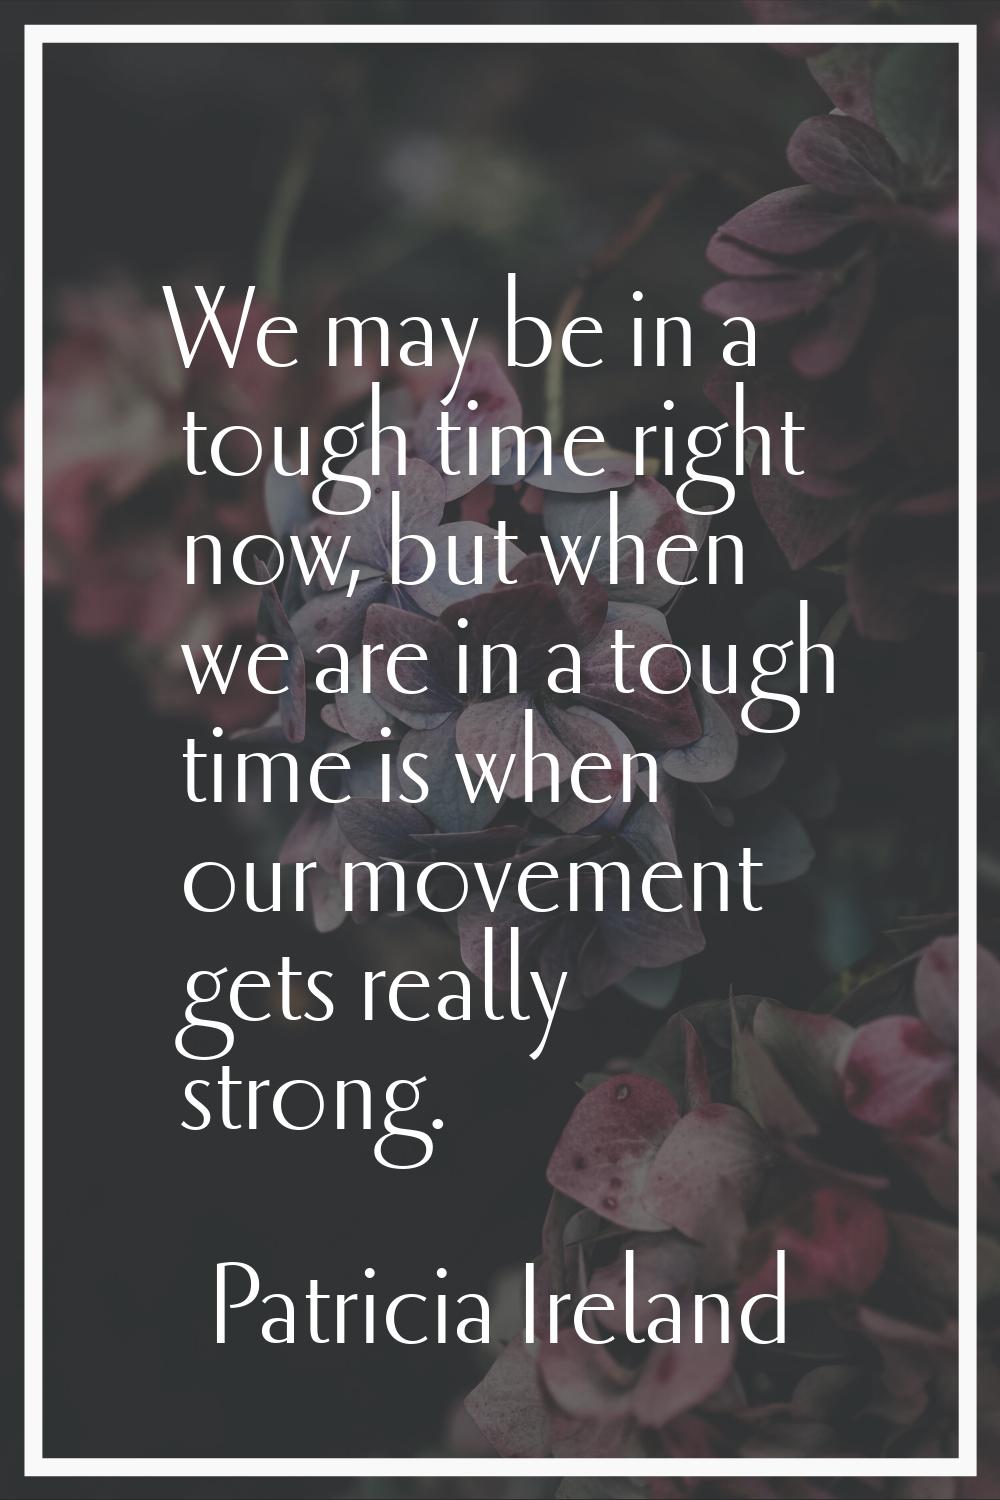 We may be in a tough time right now, but when we are in a tough time is when our movement gets real